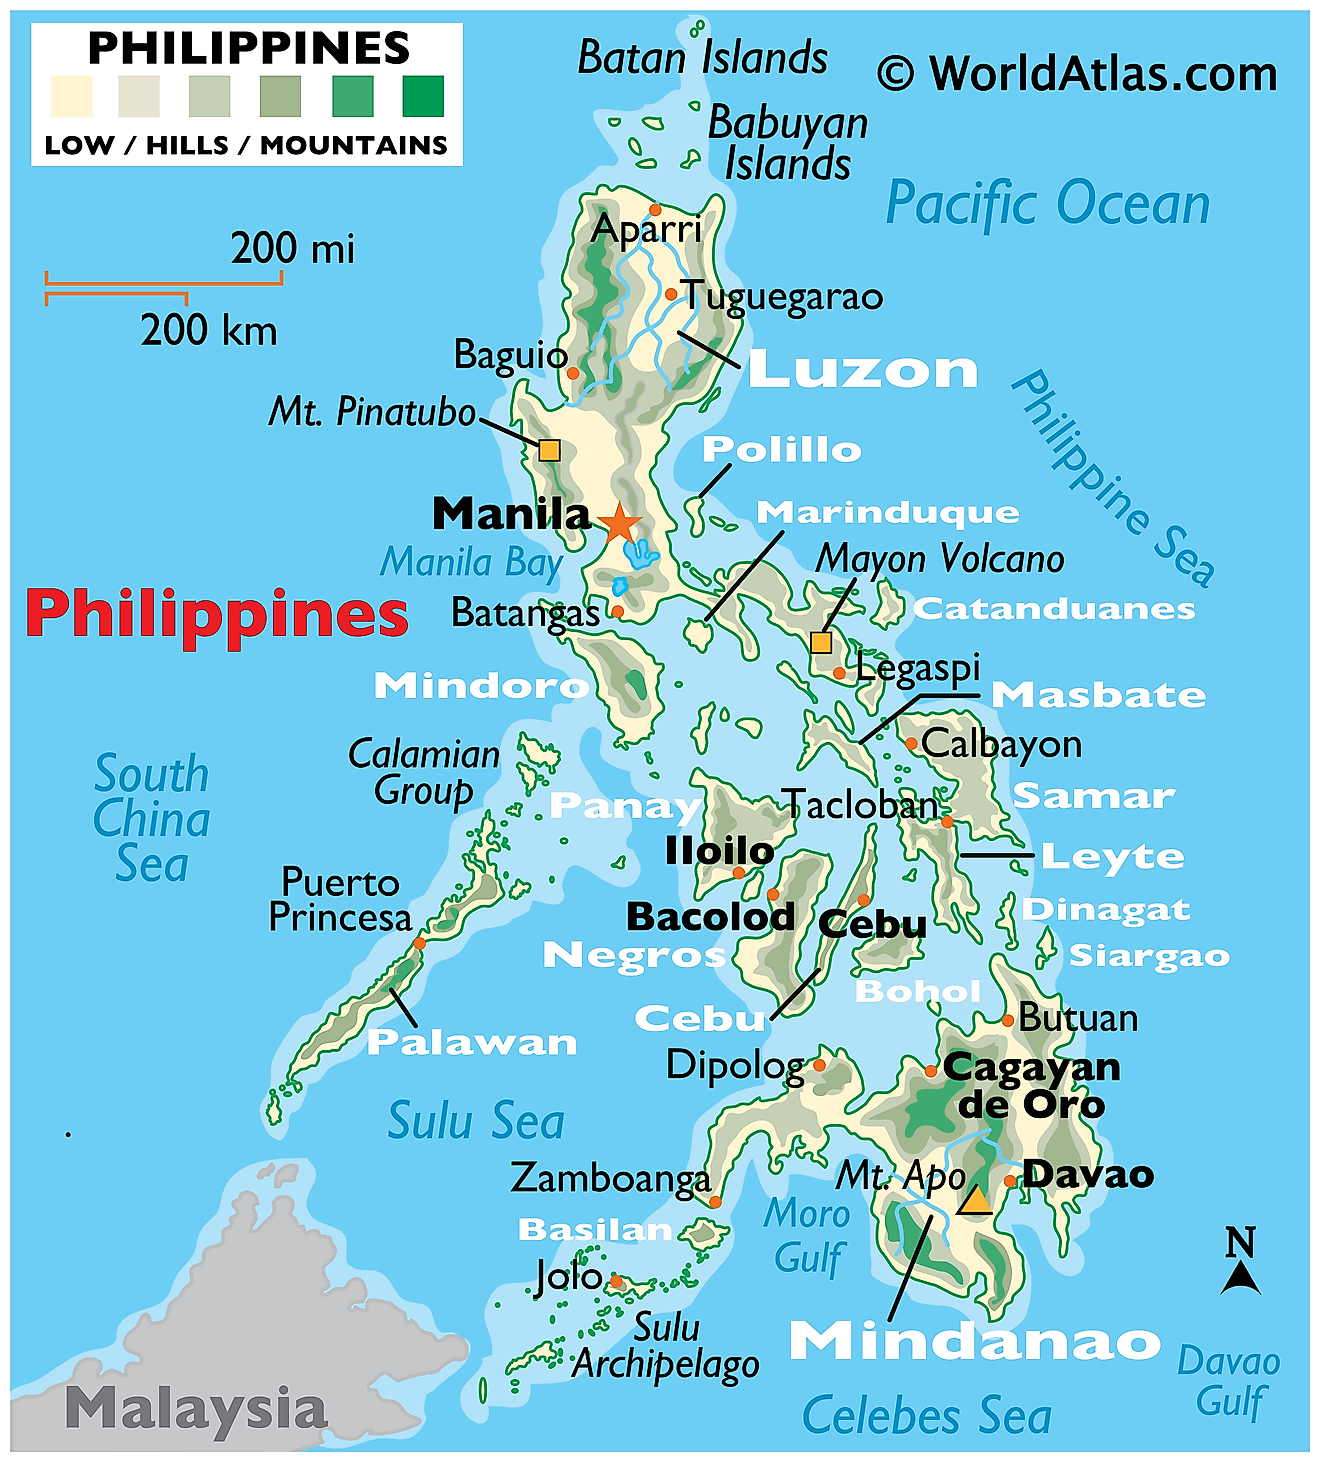 Philippines Maps Facts Philippine Map Philippines Culture Asia Map | My ...